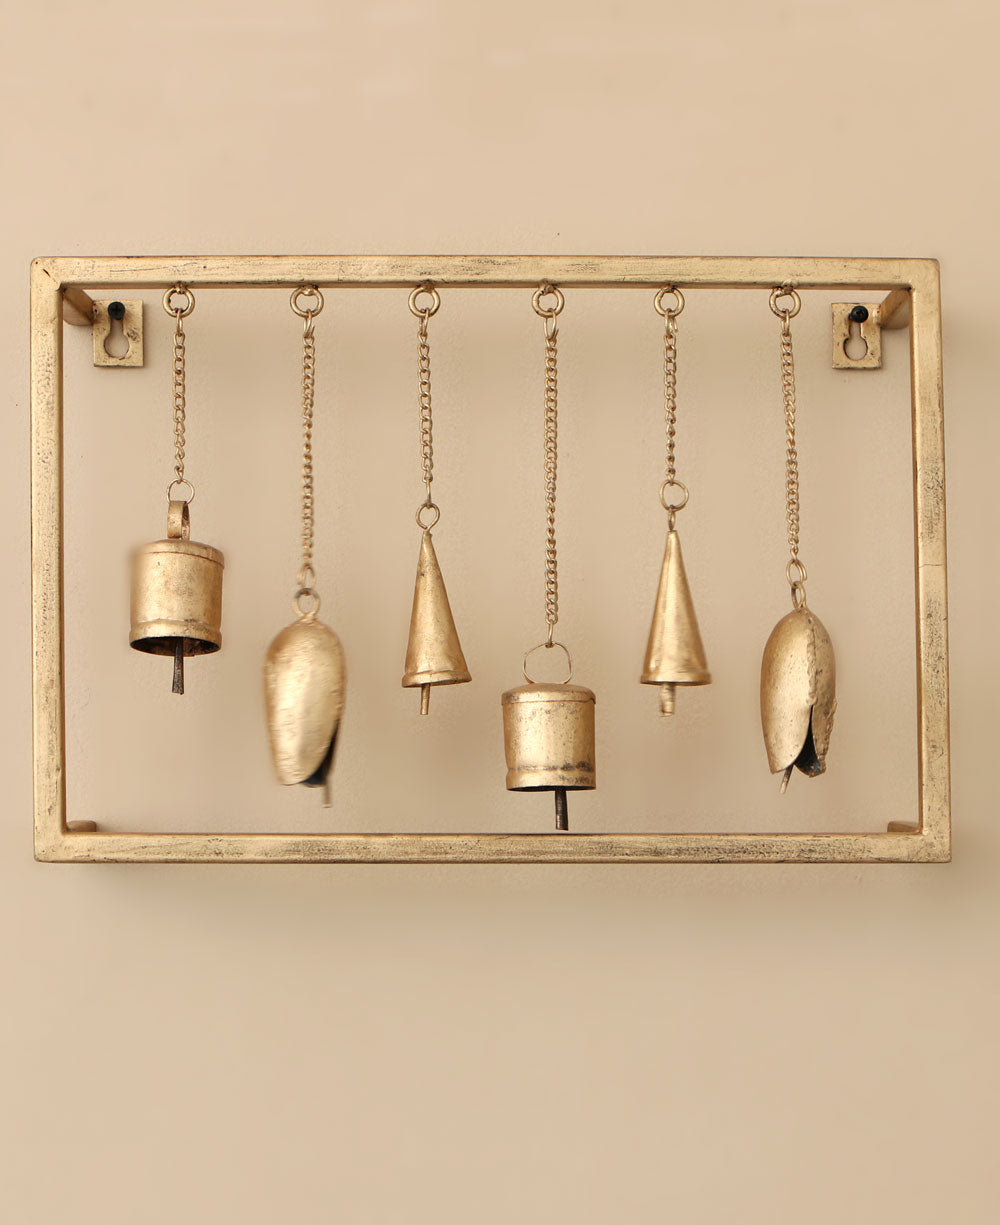 Bell Chime Wall Decor